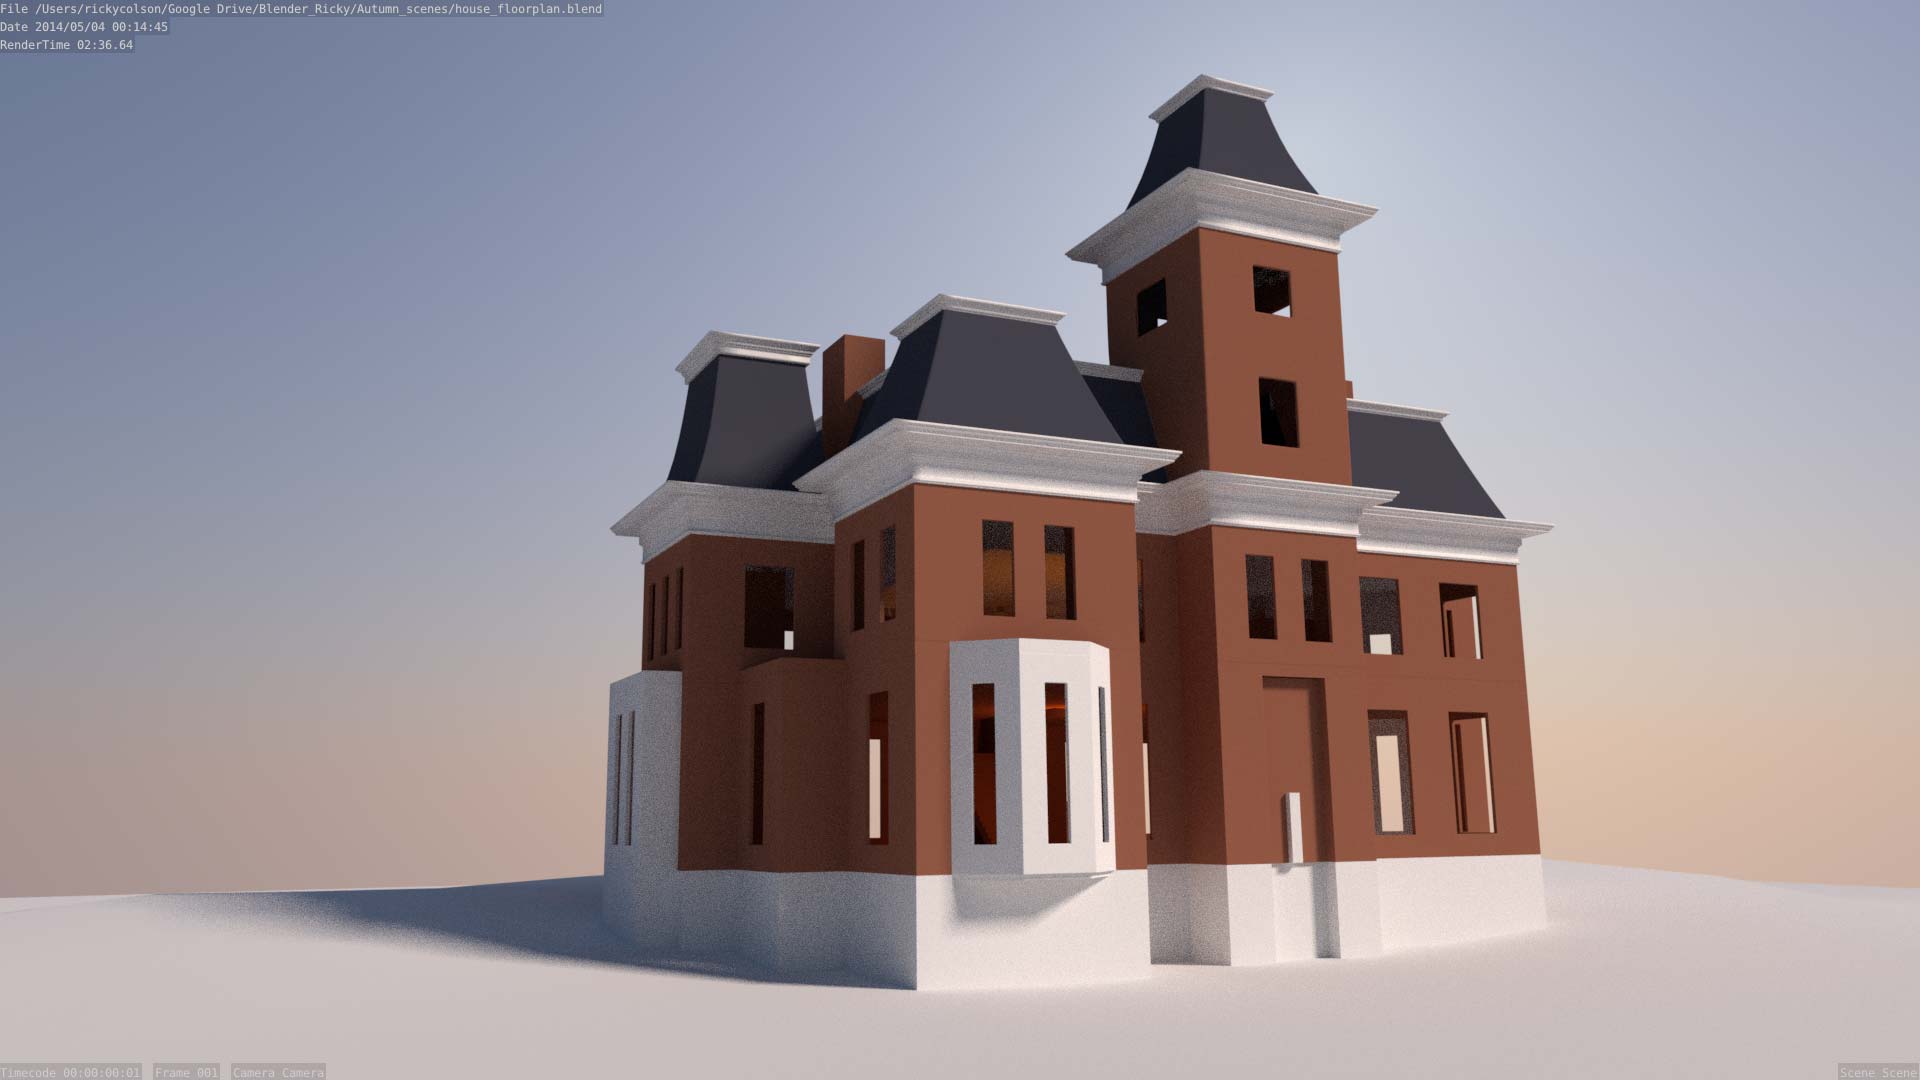 3d model of Second Empire style mansion